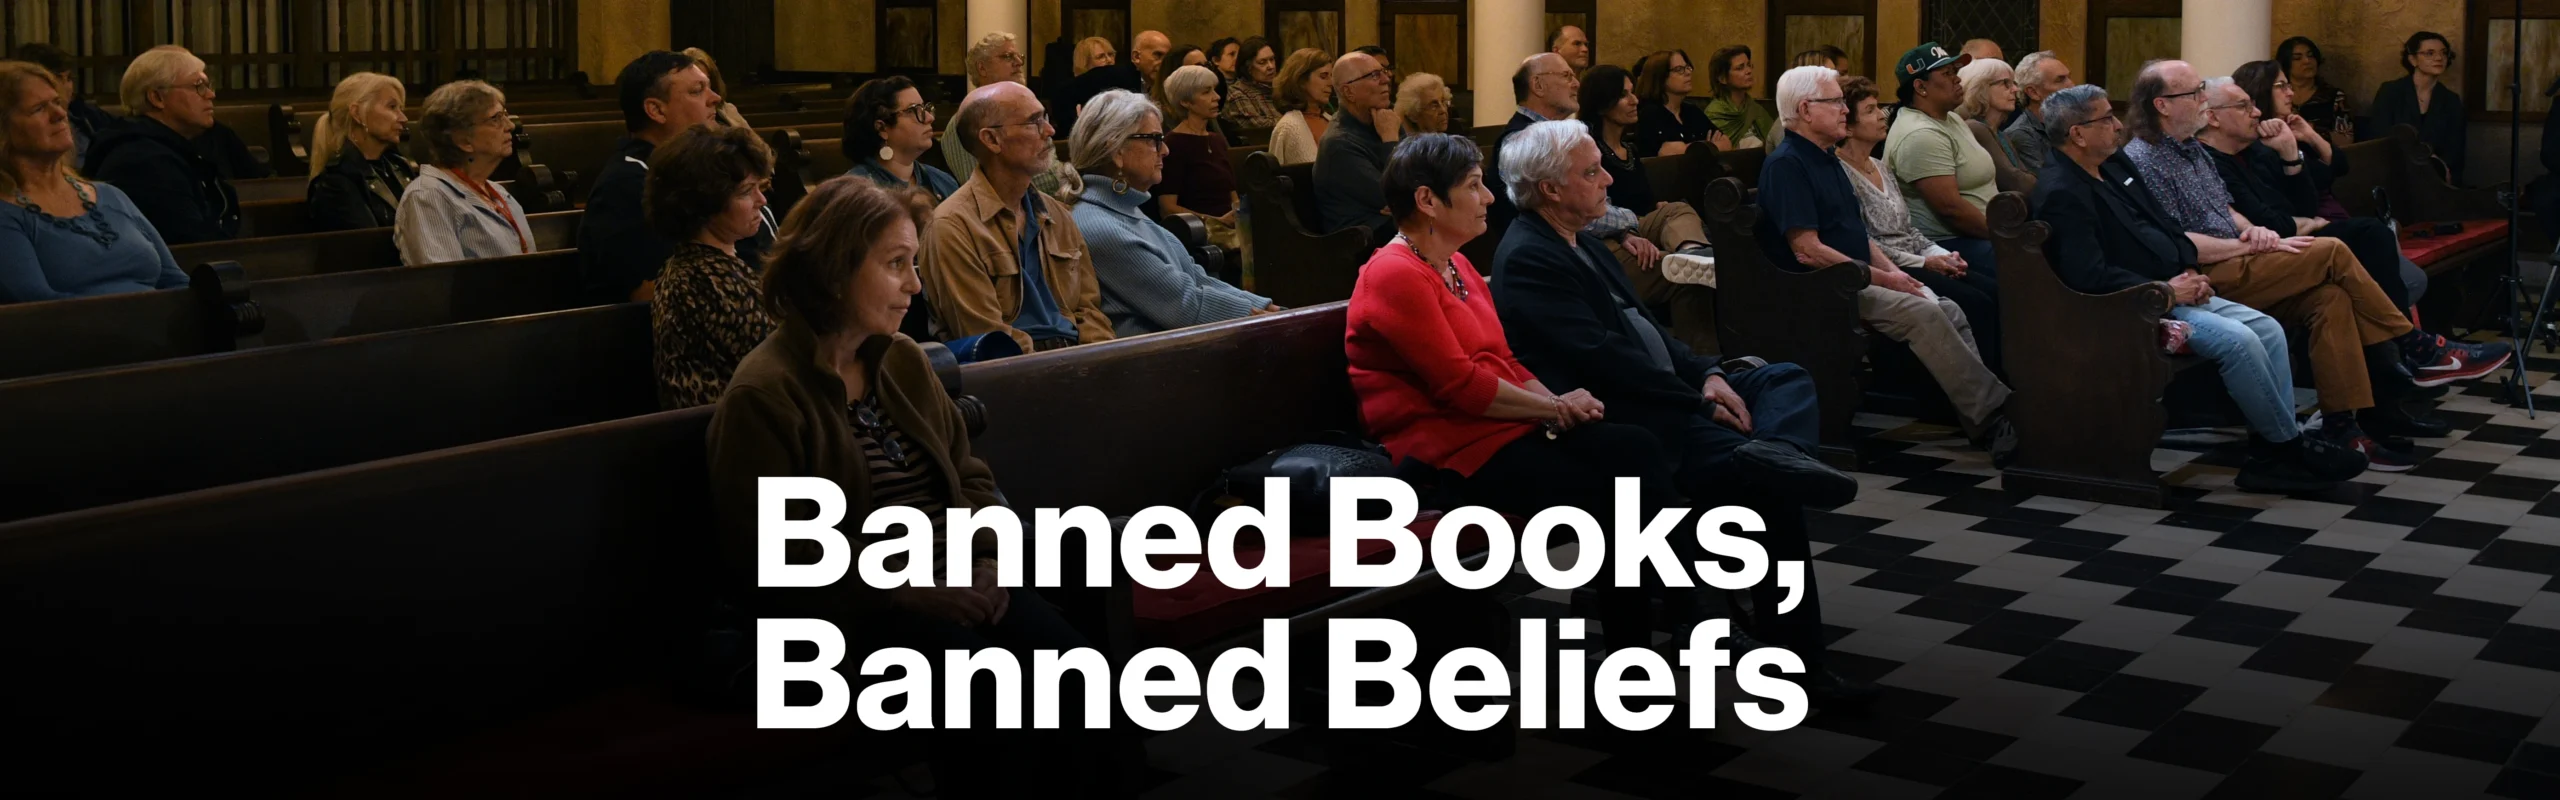 Group of people sitting in pews at a religious institution. Text reads " Banned Books, Banned Beliefs"